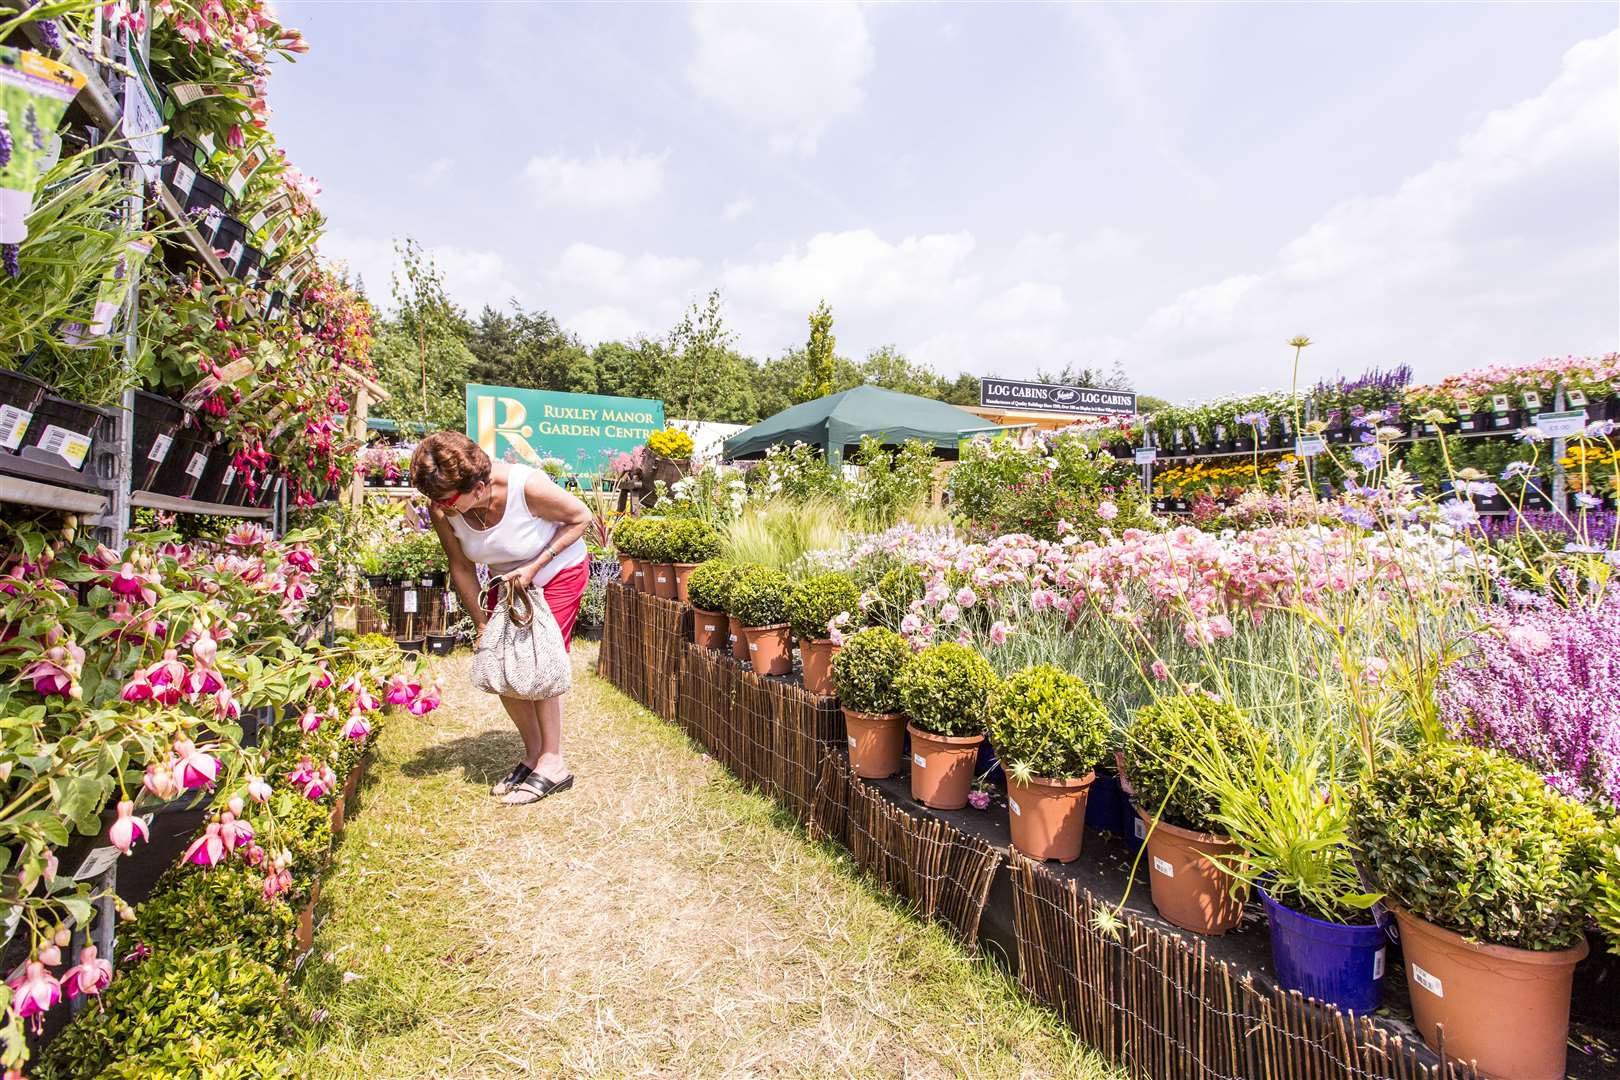 There is also the possibility of making a bargain for your own garden.  Photo: Thomas Alexander